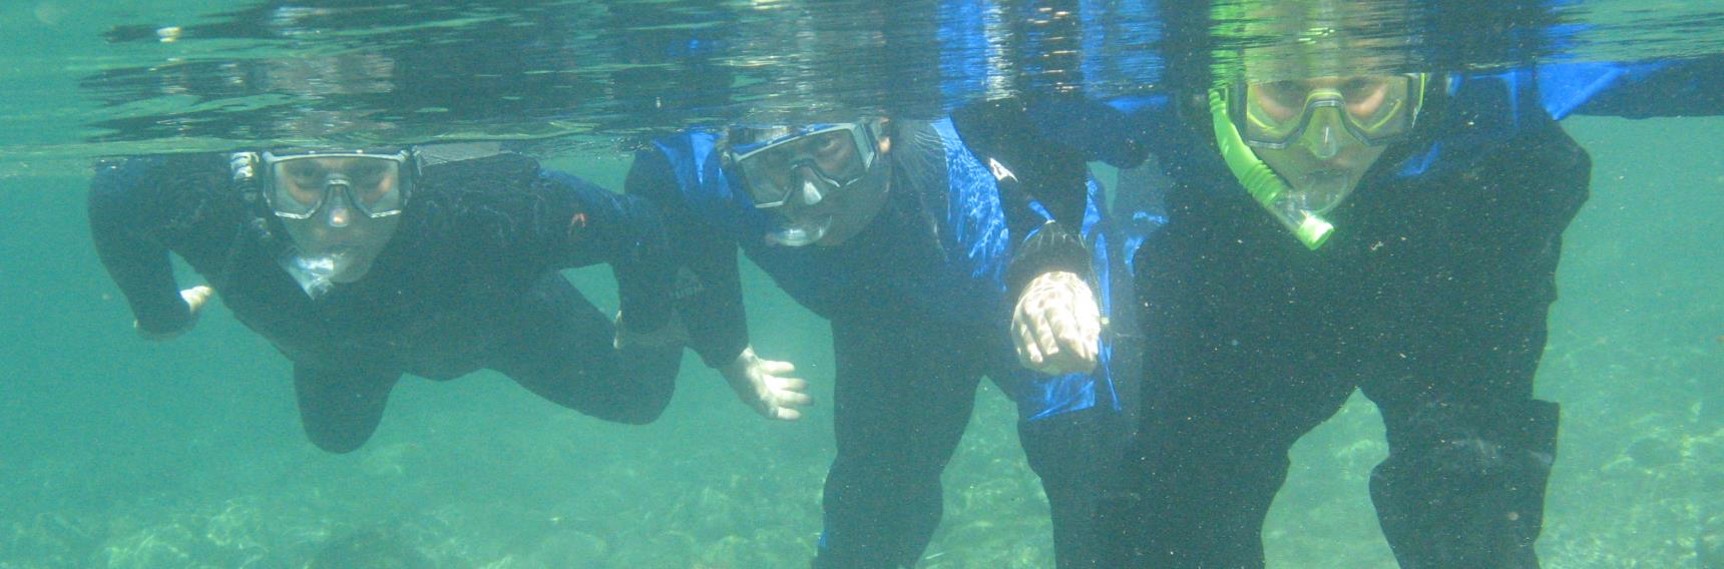 An image of three snorkelers